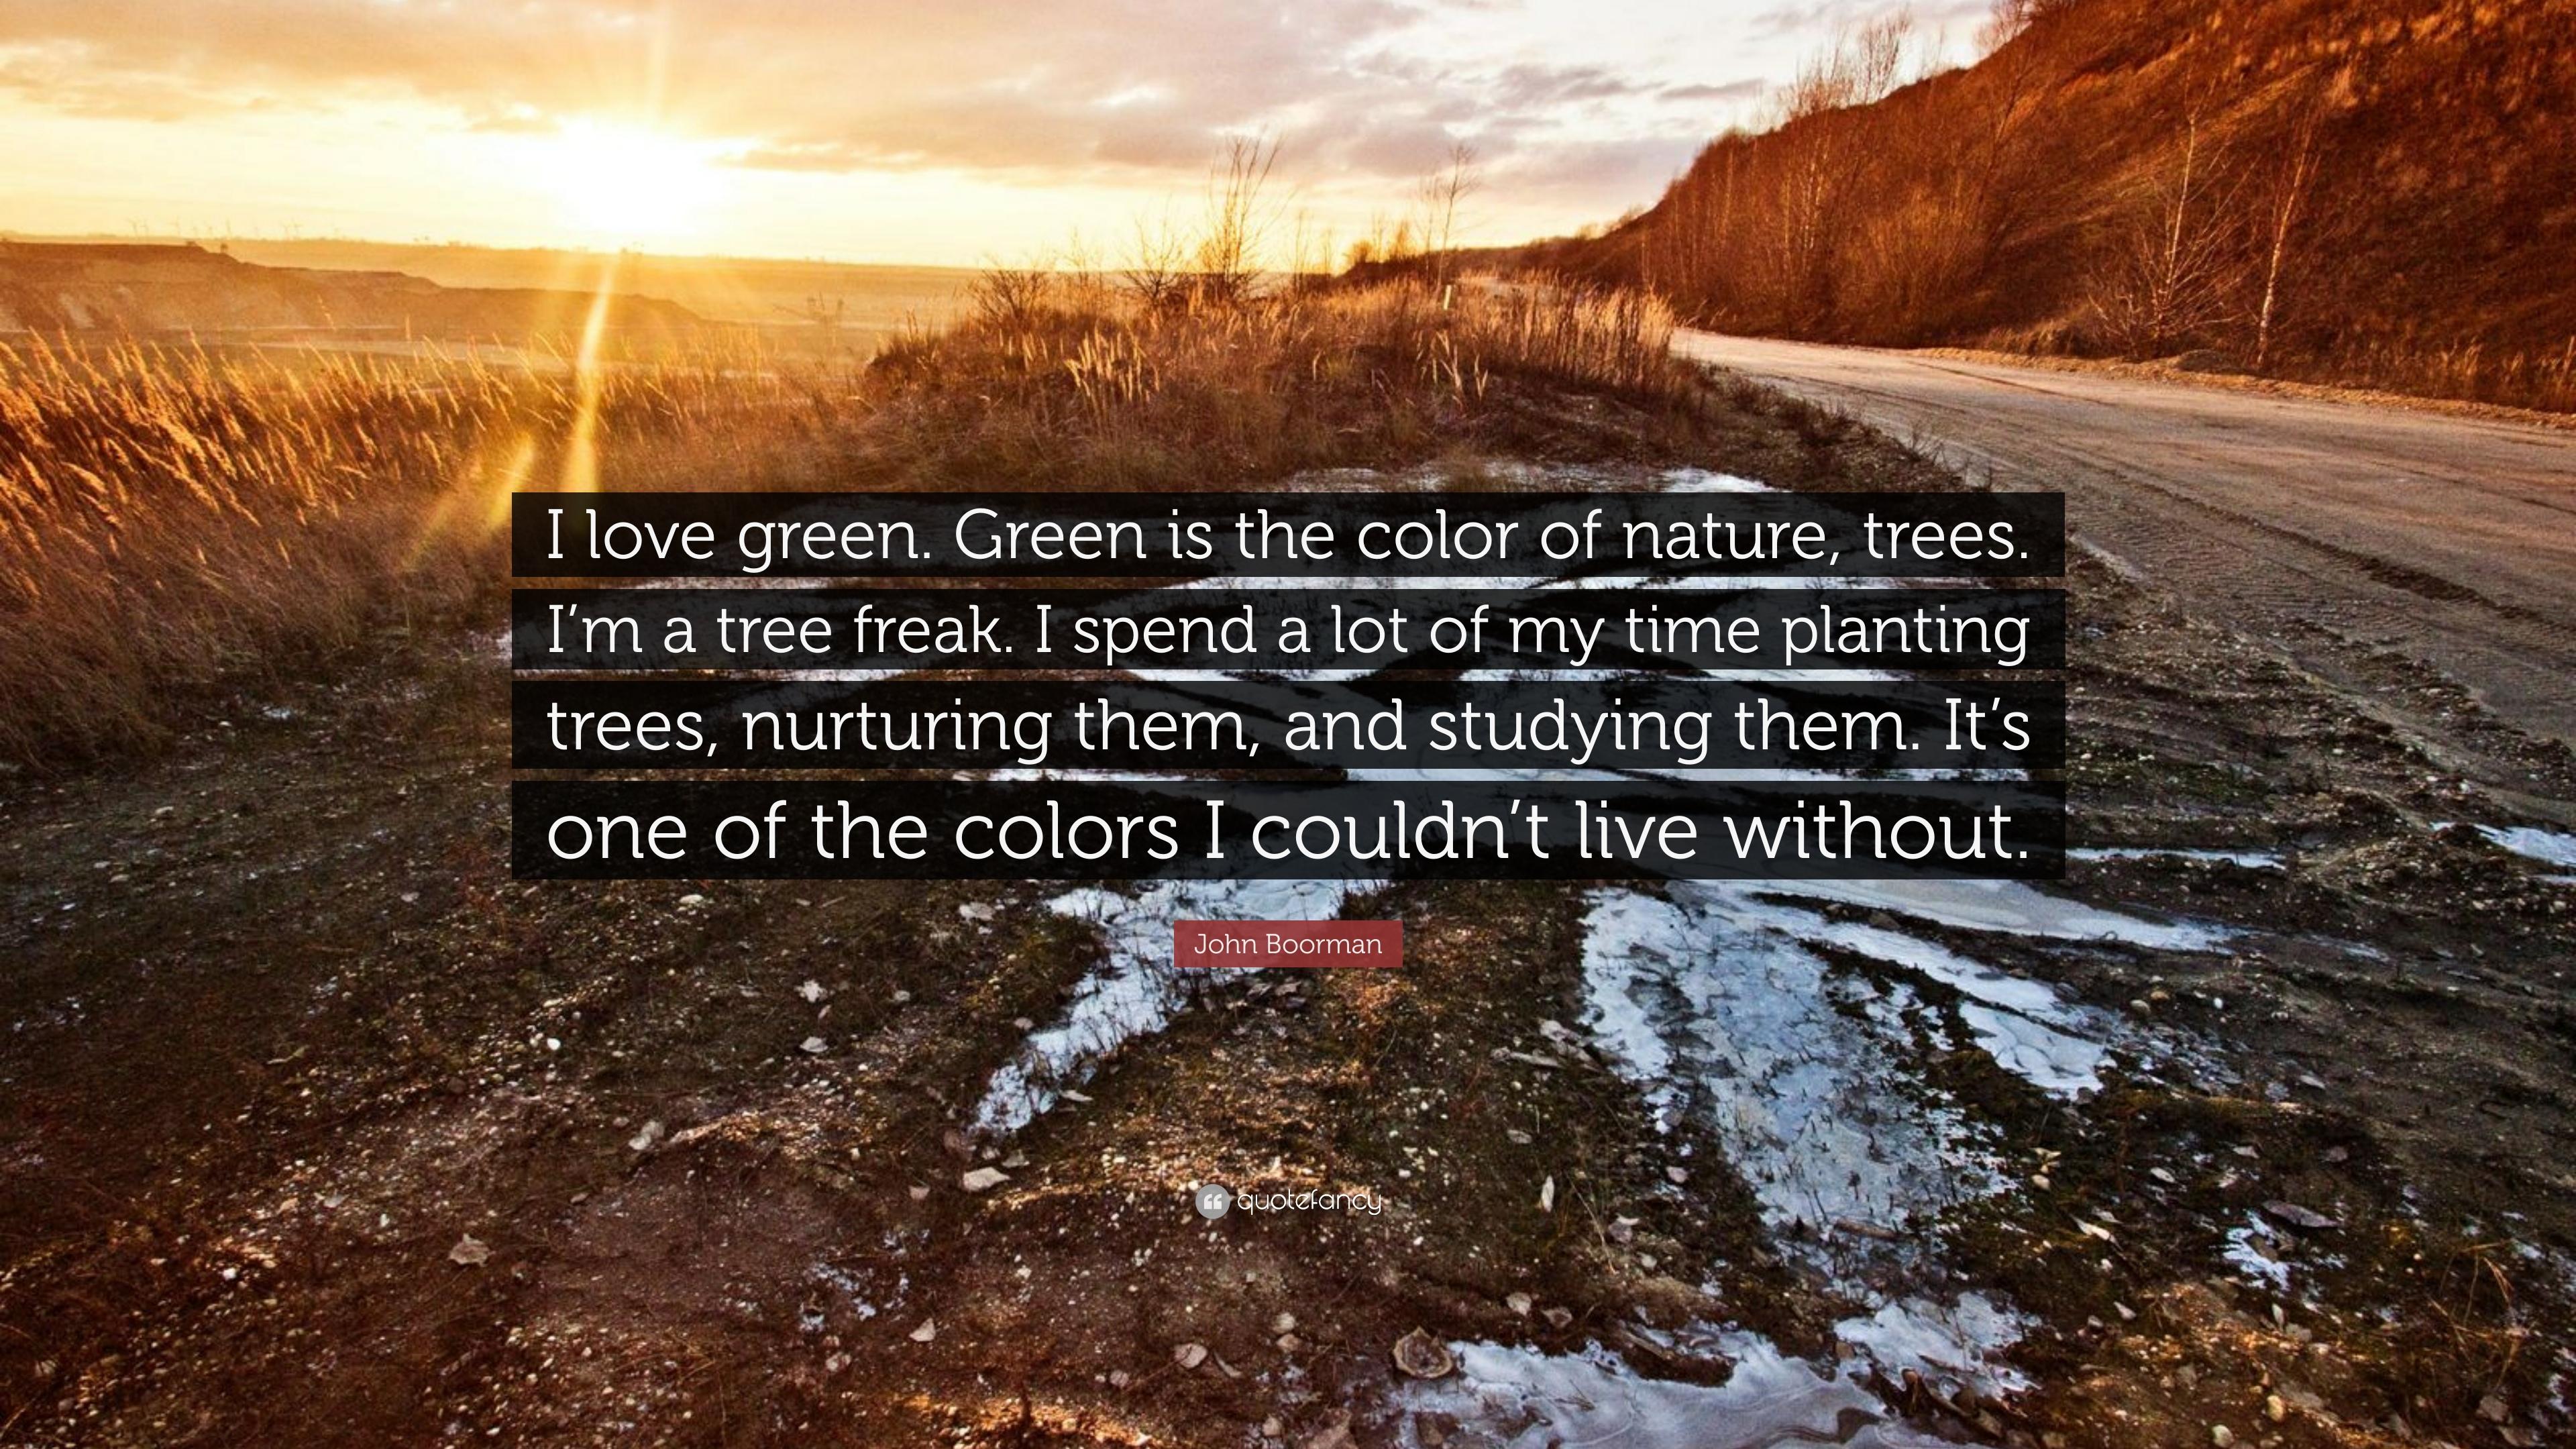 John Boorman Quote: “I love green. Green is the color